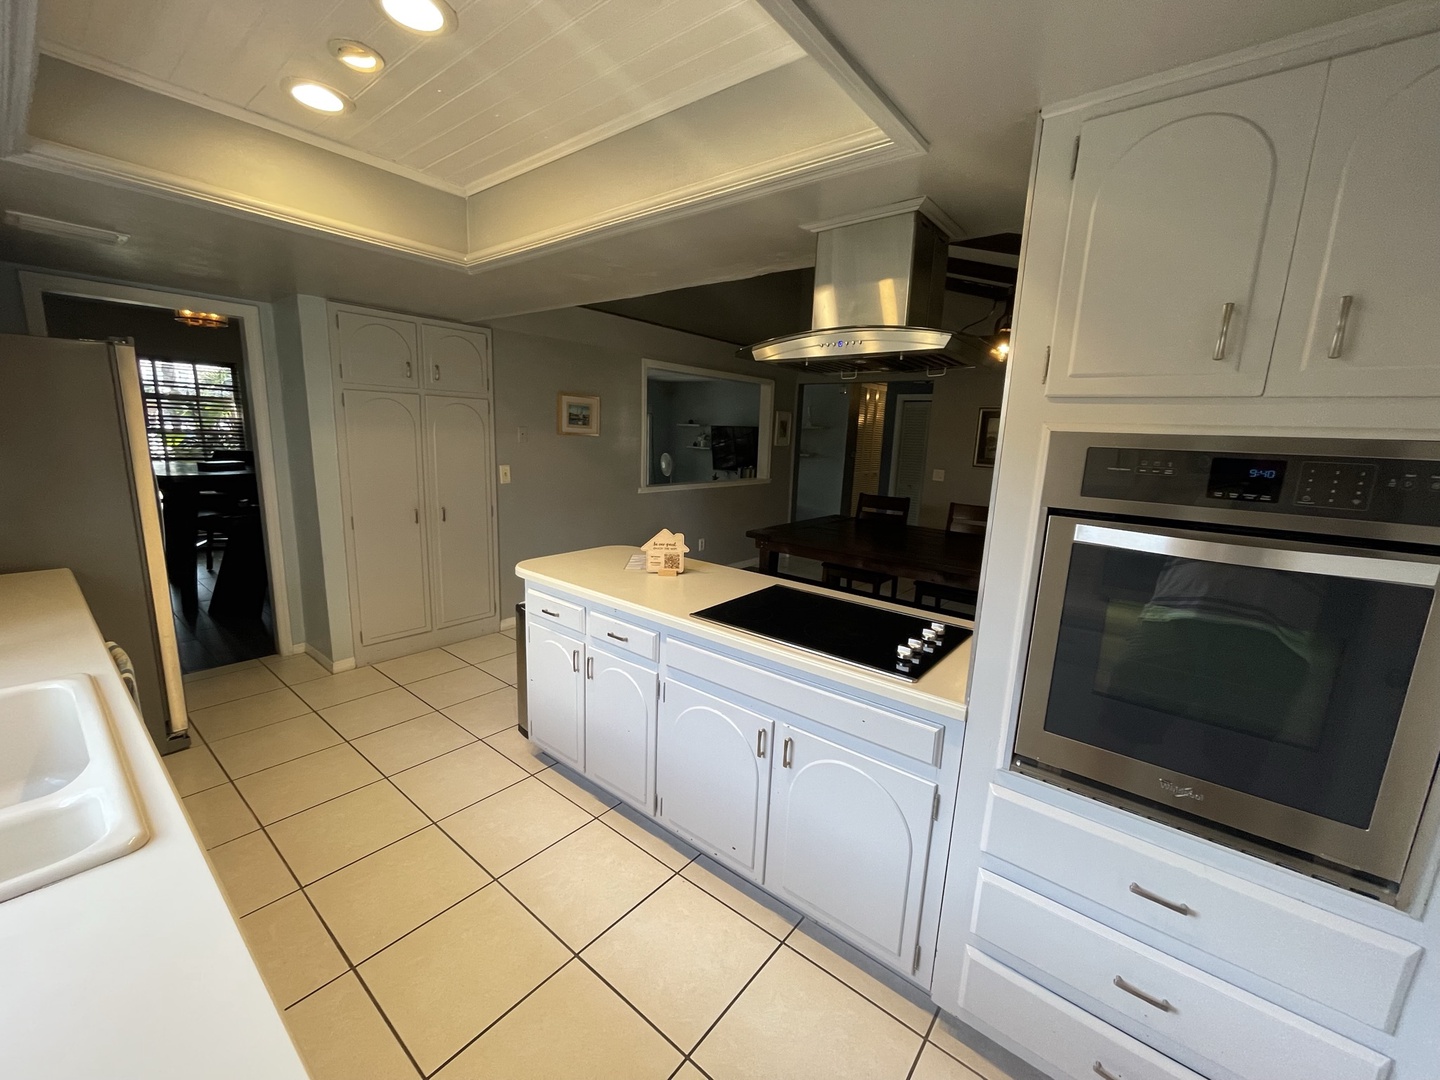 The kitchen is spacious & offers all the comforts of home